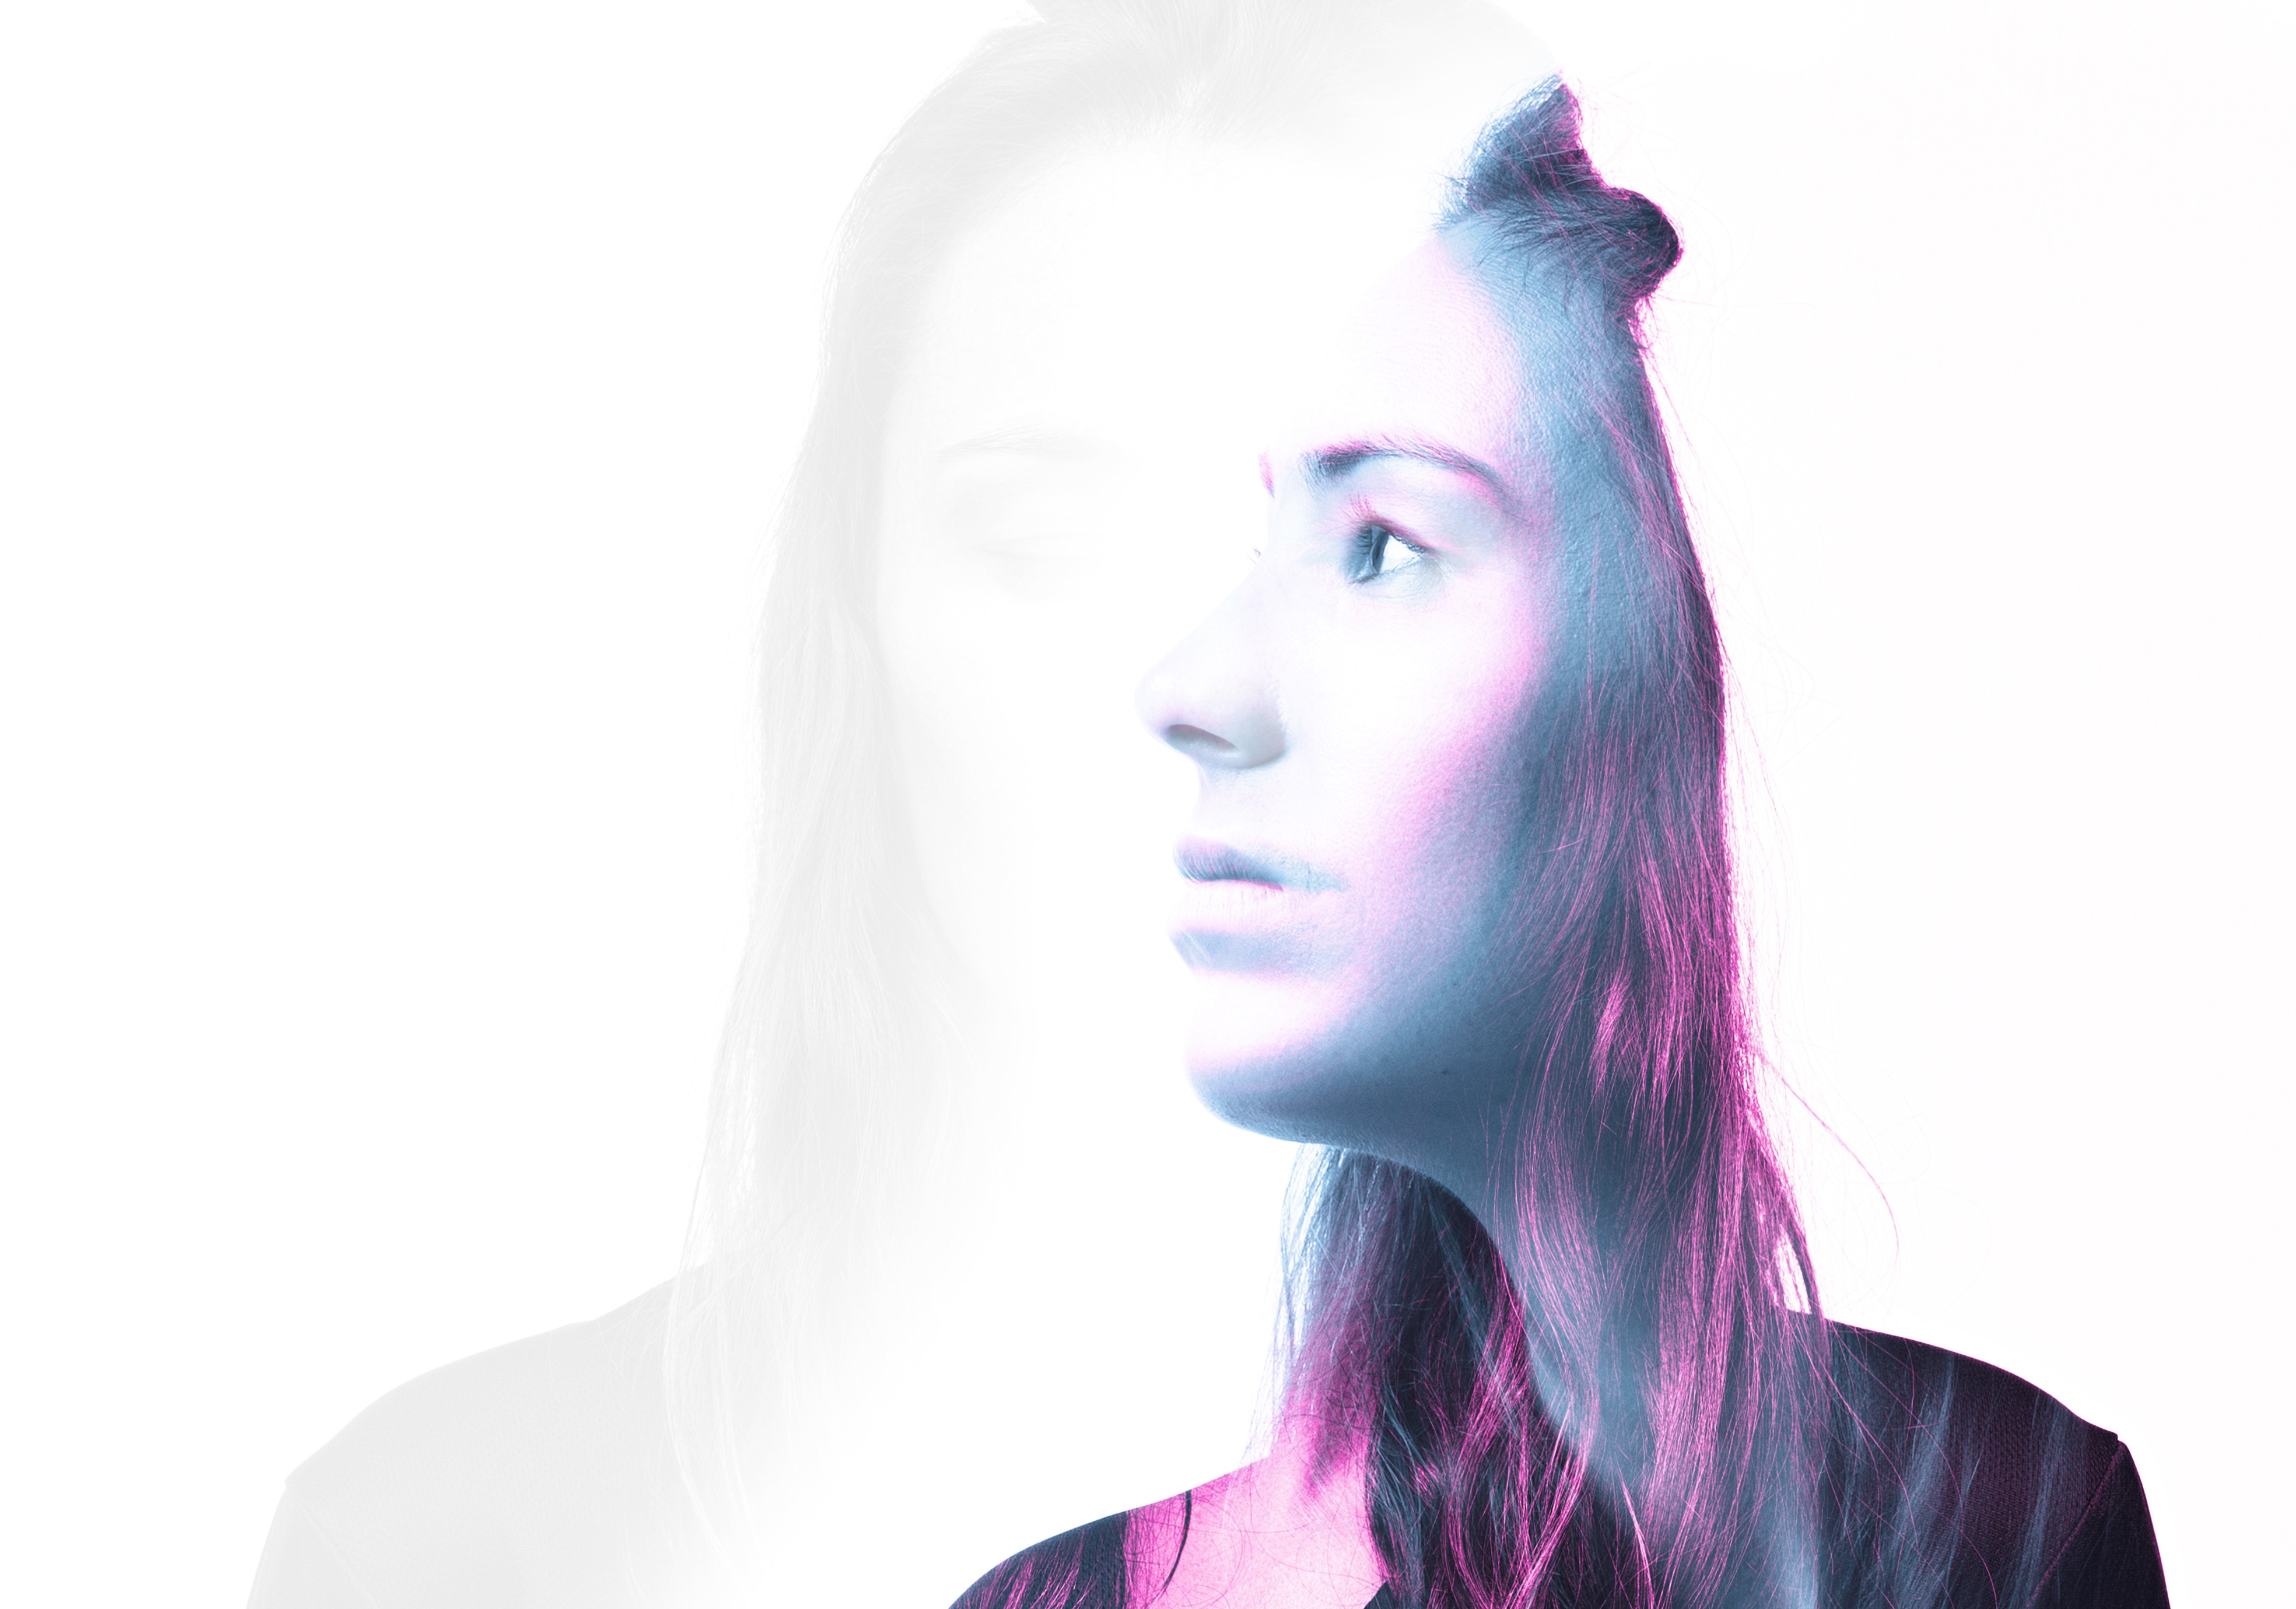 Amy Shark Releases Brand New Single ‘Weekends’